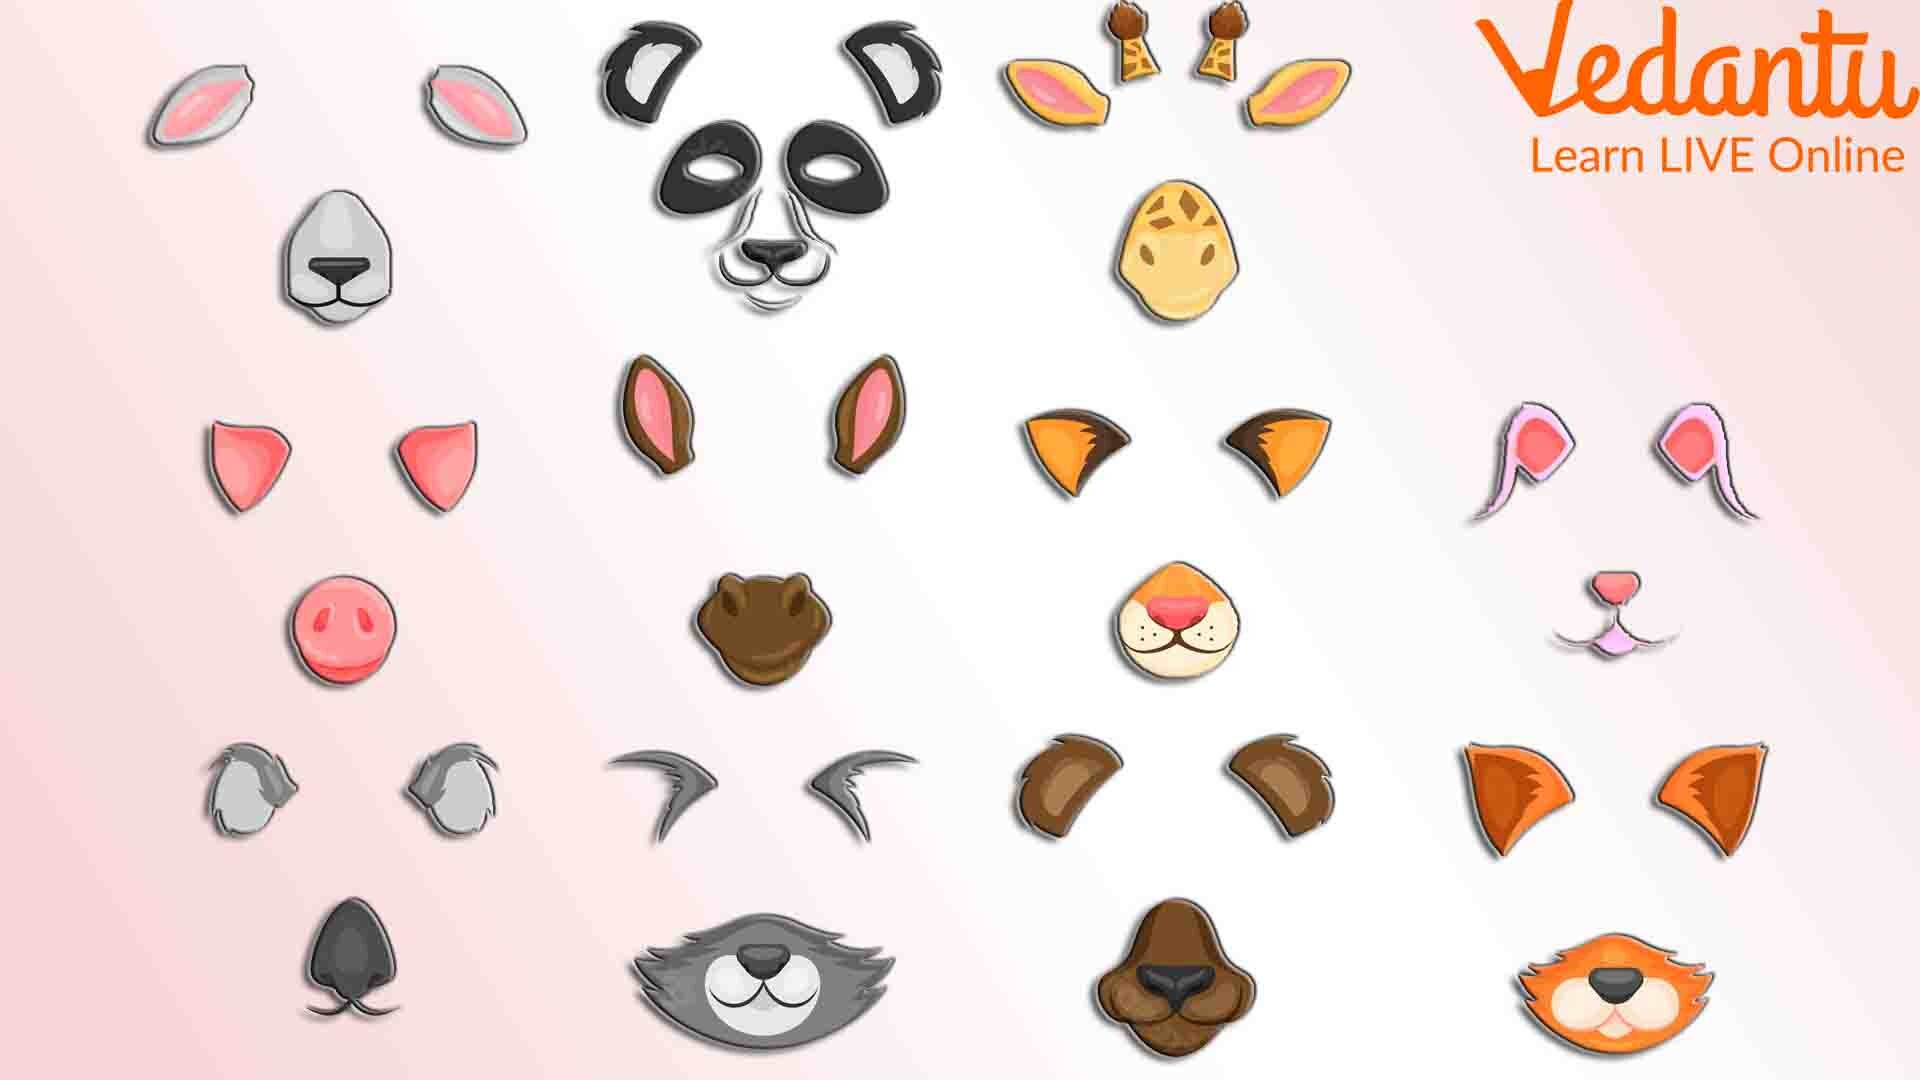 Why Do Ears of Animals Have Different Shapes